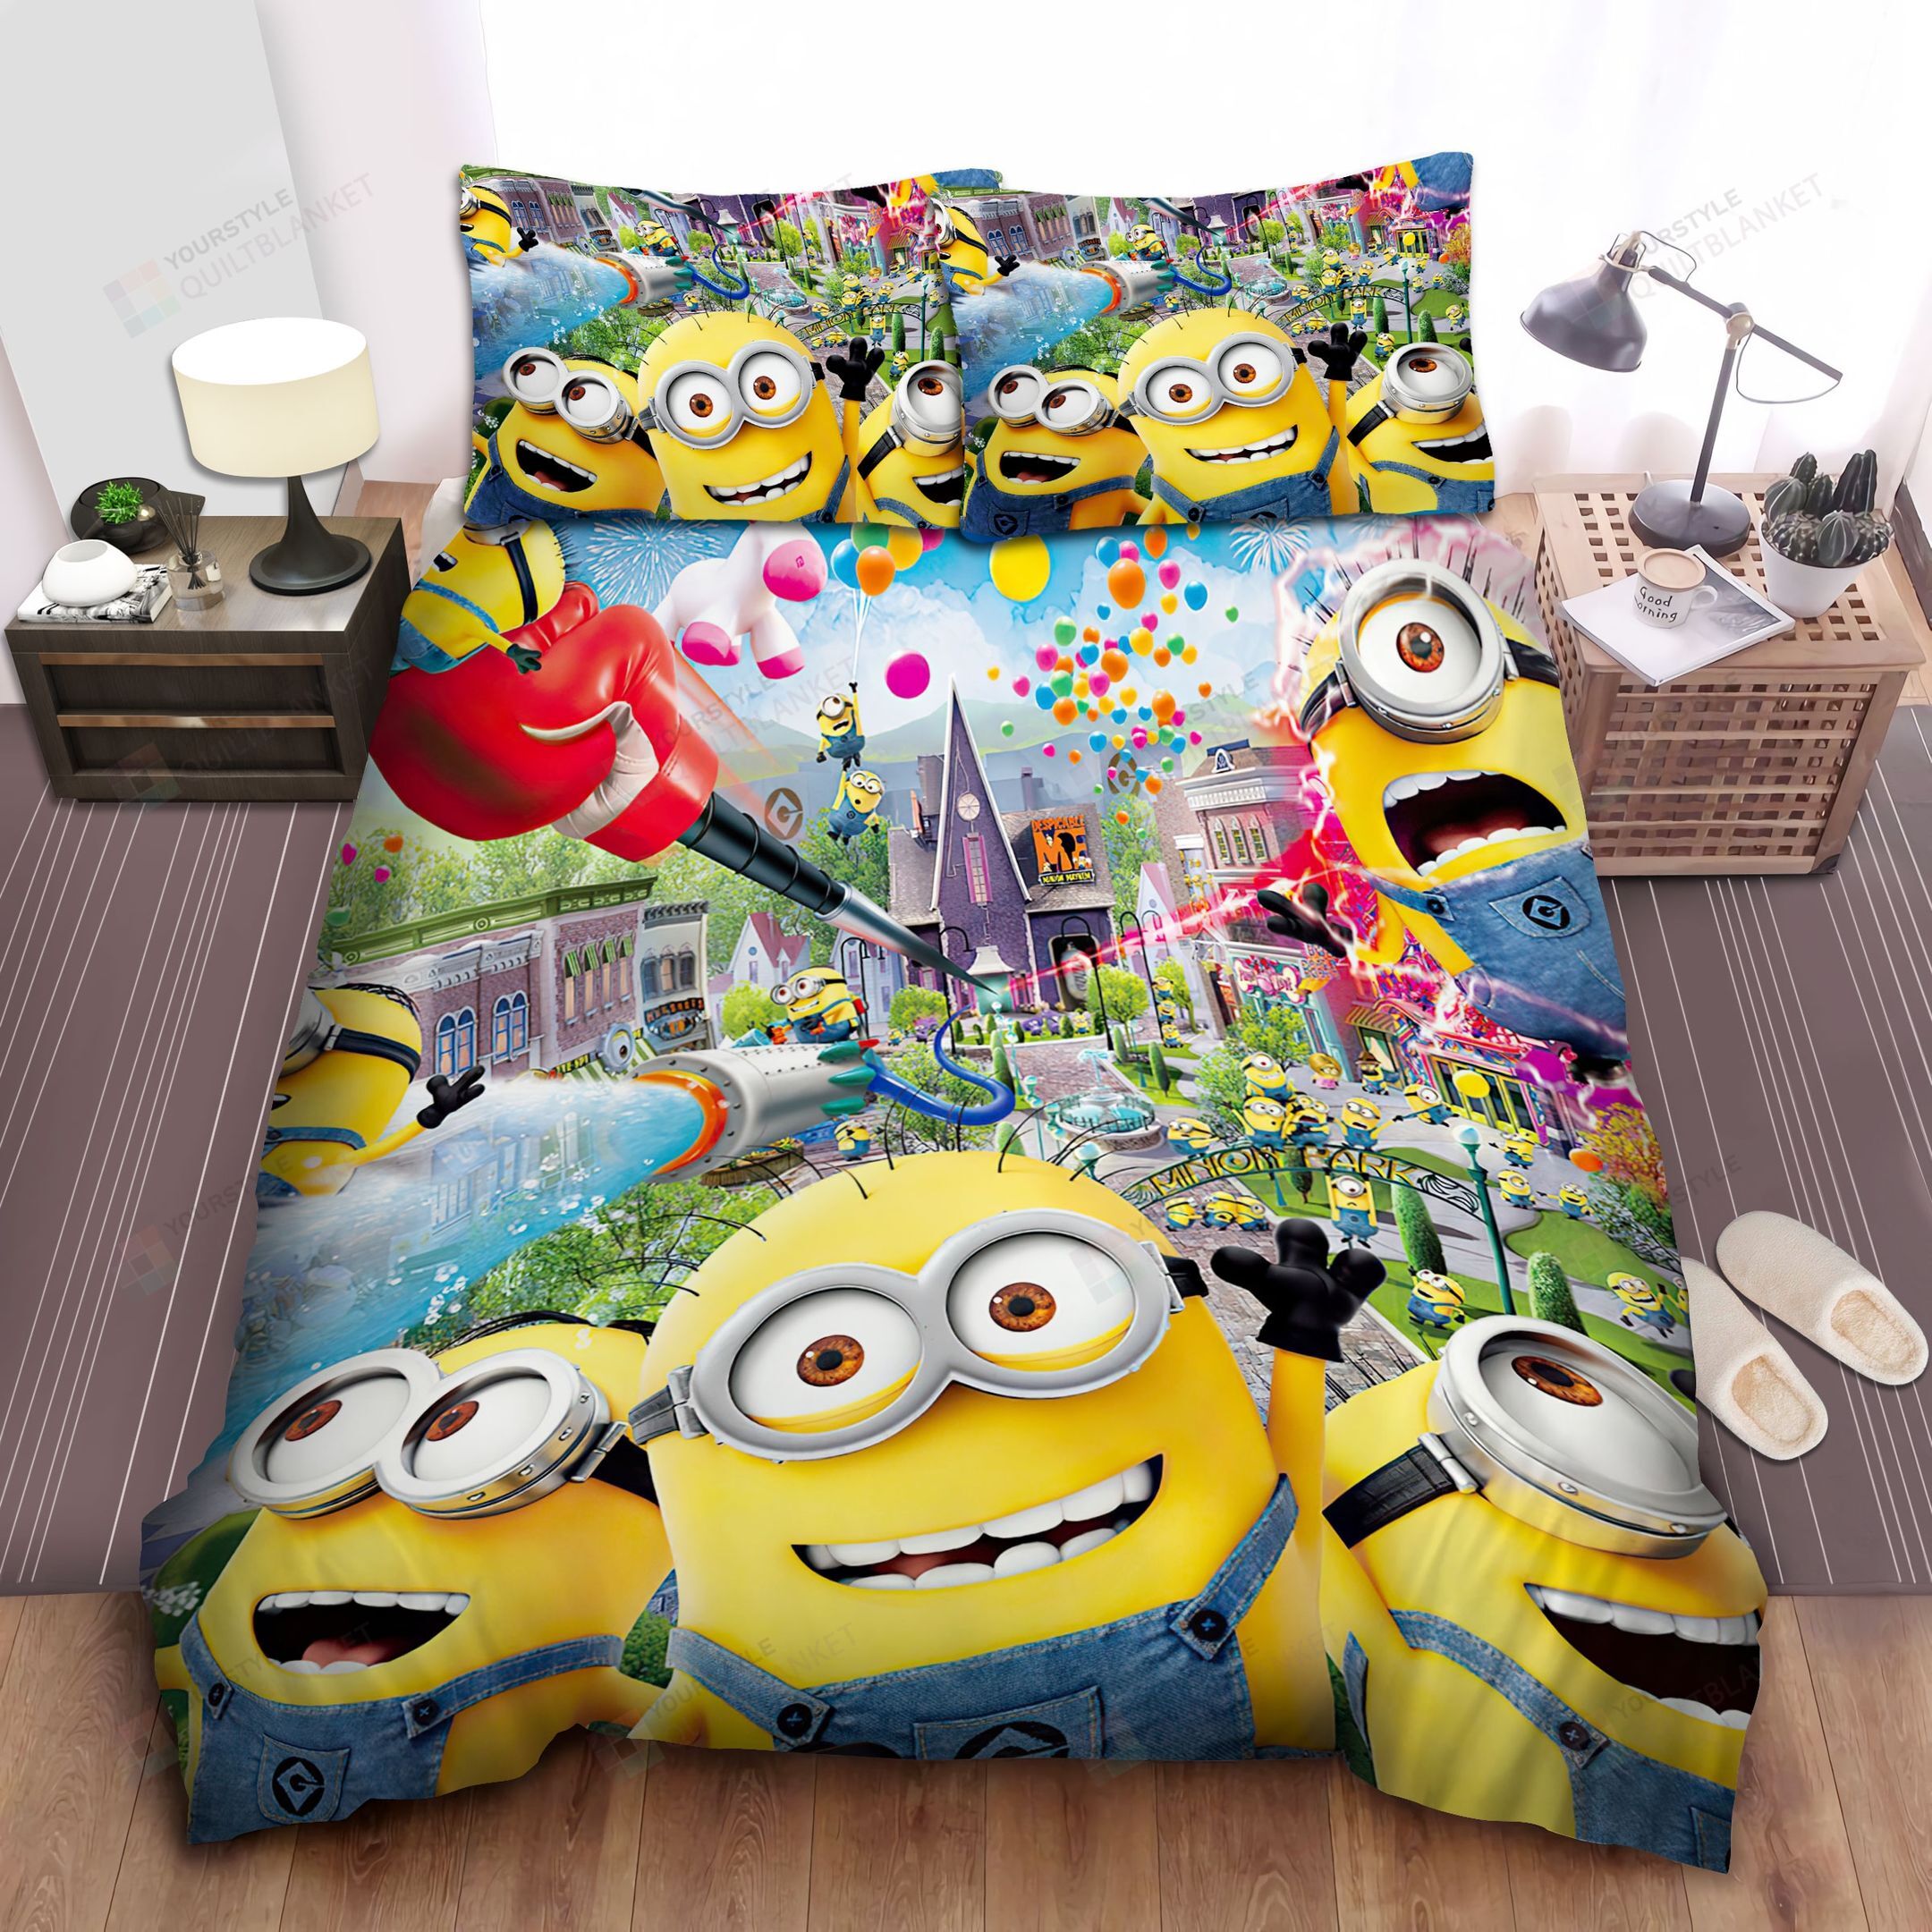 Minion In Despicable Me, Minions Park  Bed Sheets Spread Comforter Duvet Cover Bedding Sets